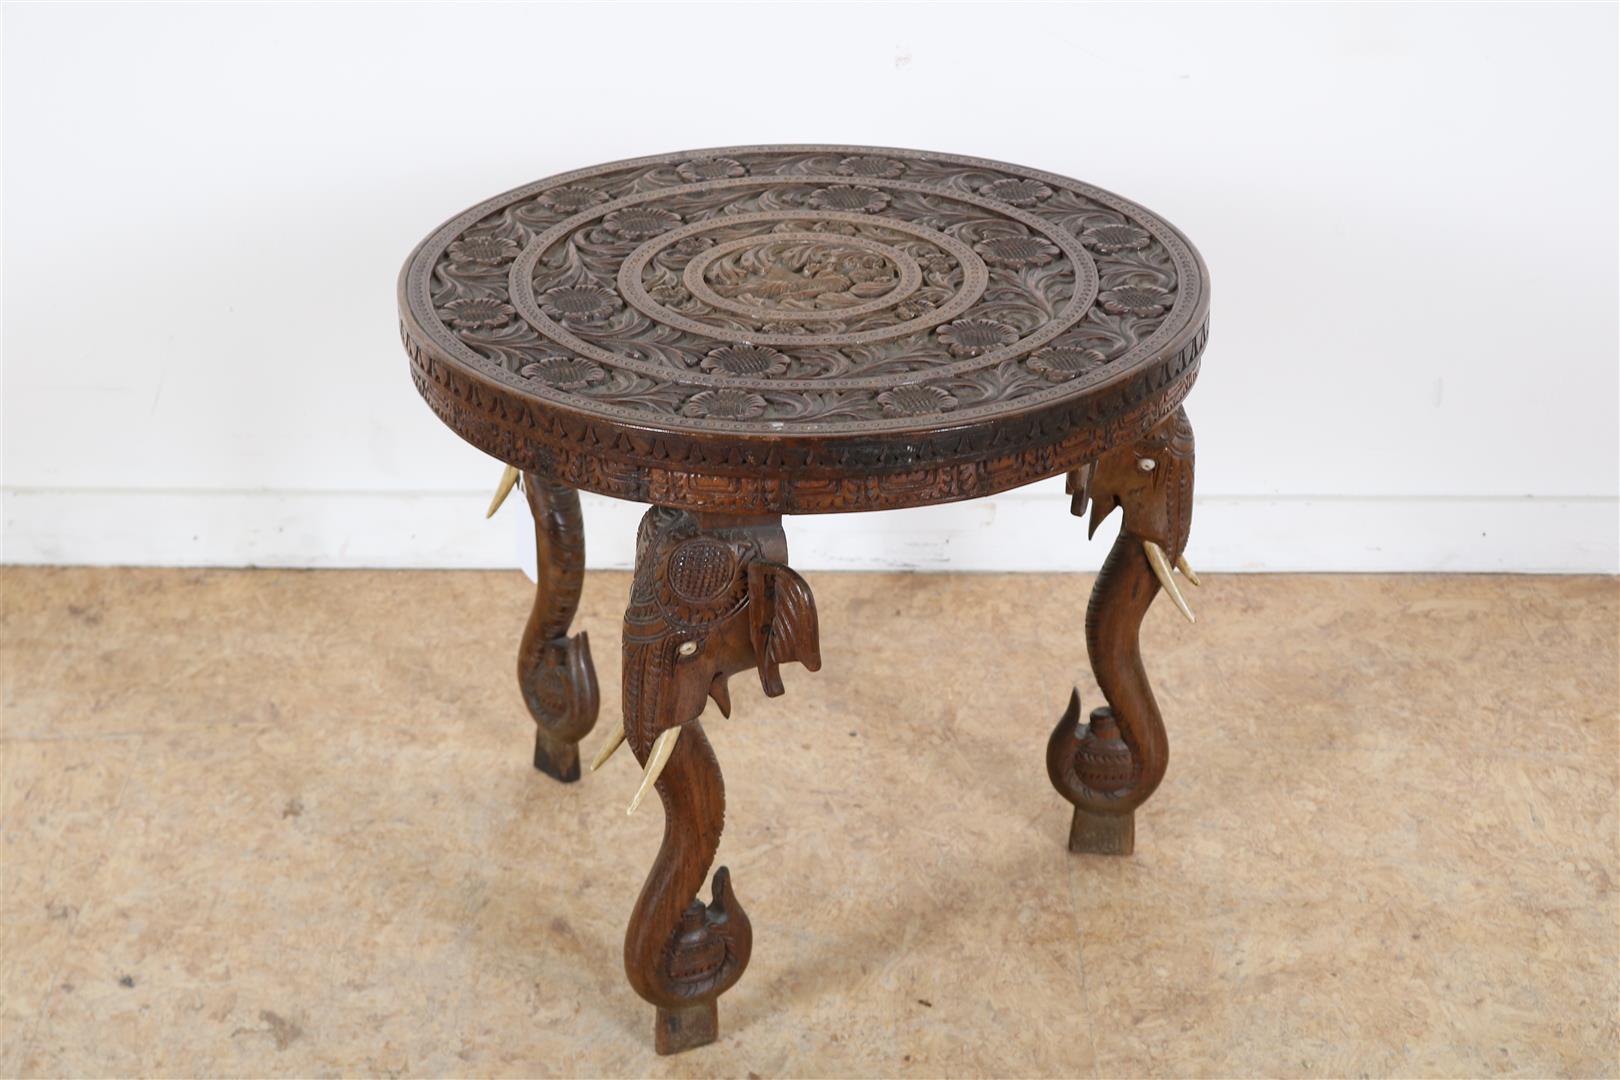 Teak elephant table with bone tusks and floral relief top, India, 39 x 46 cm.